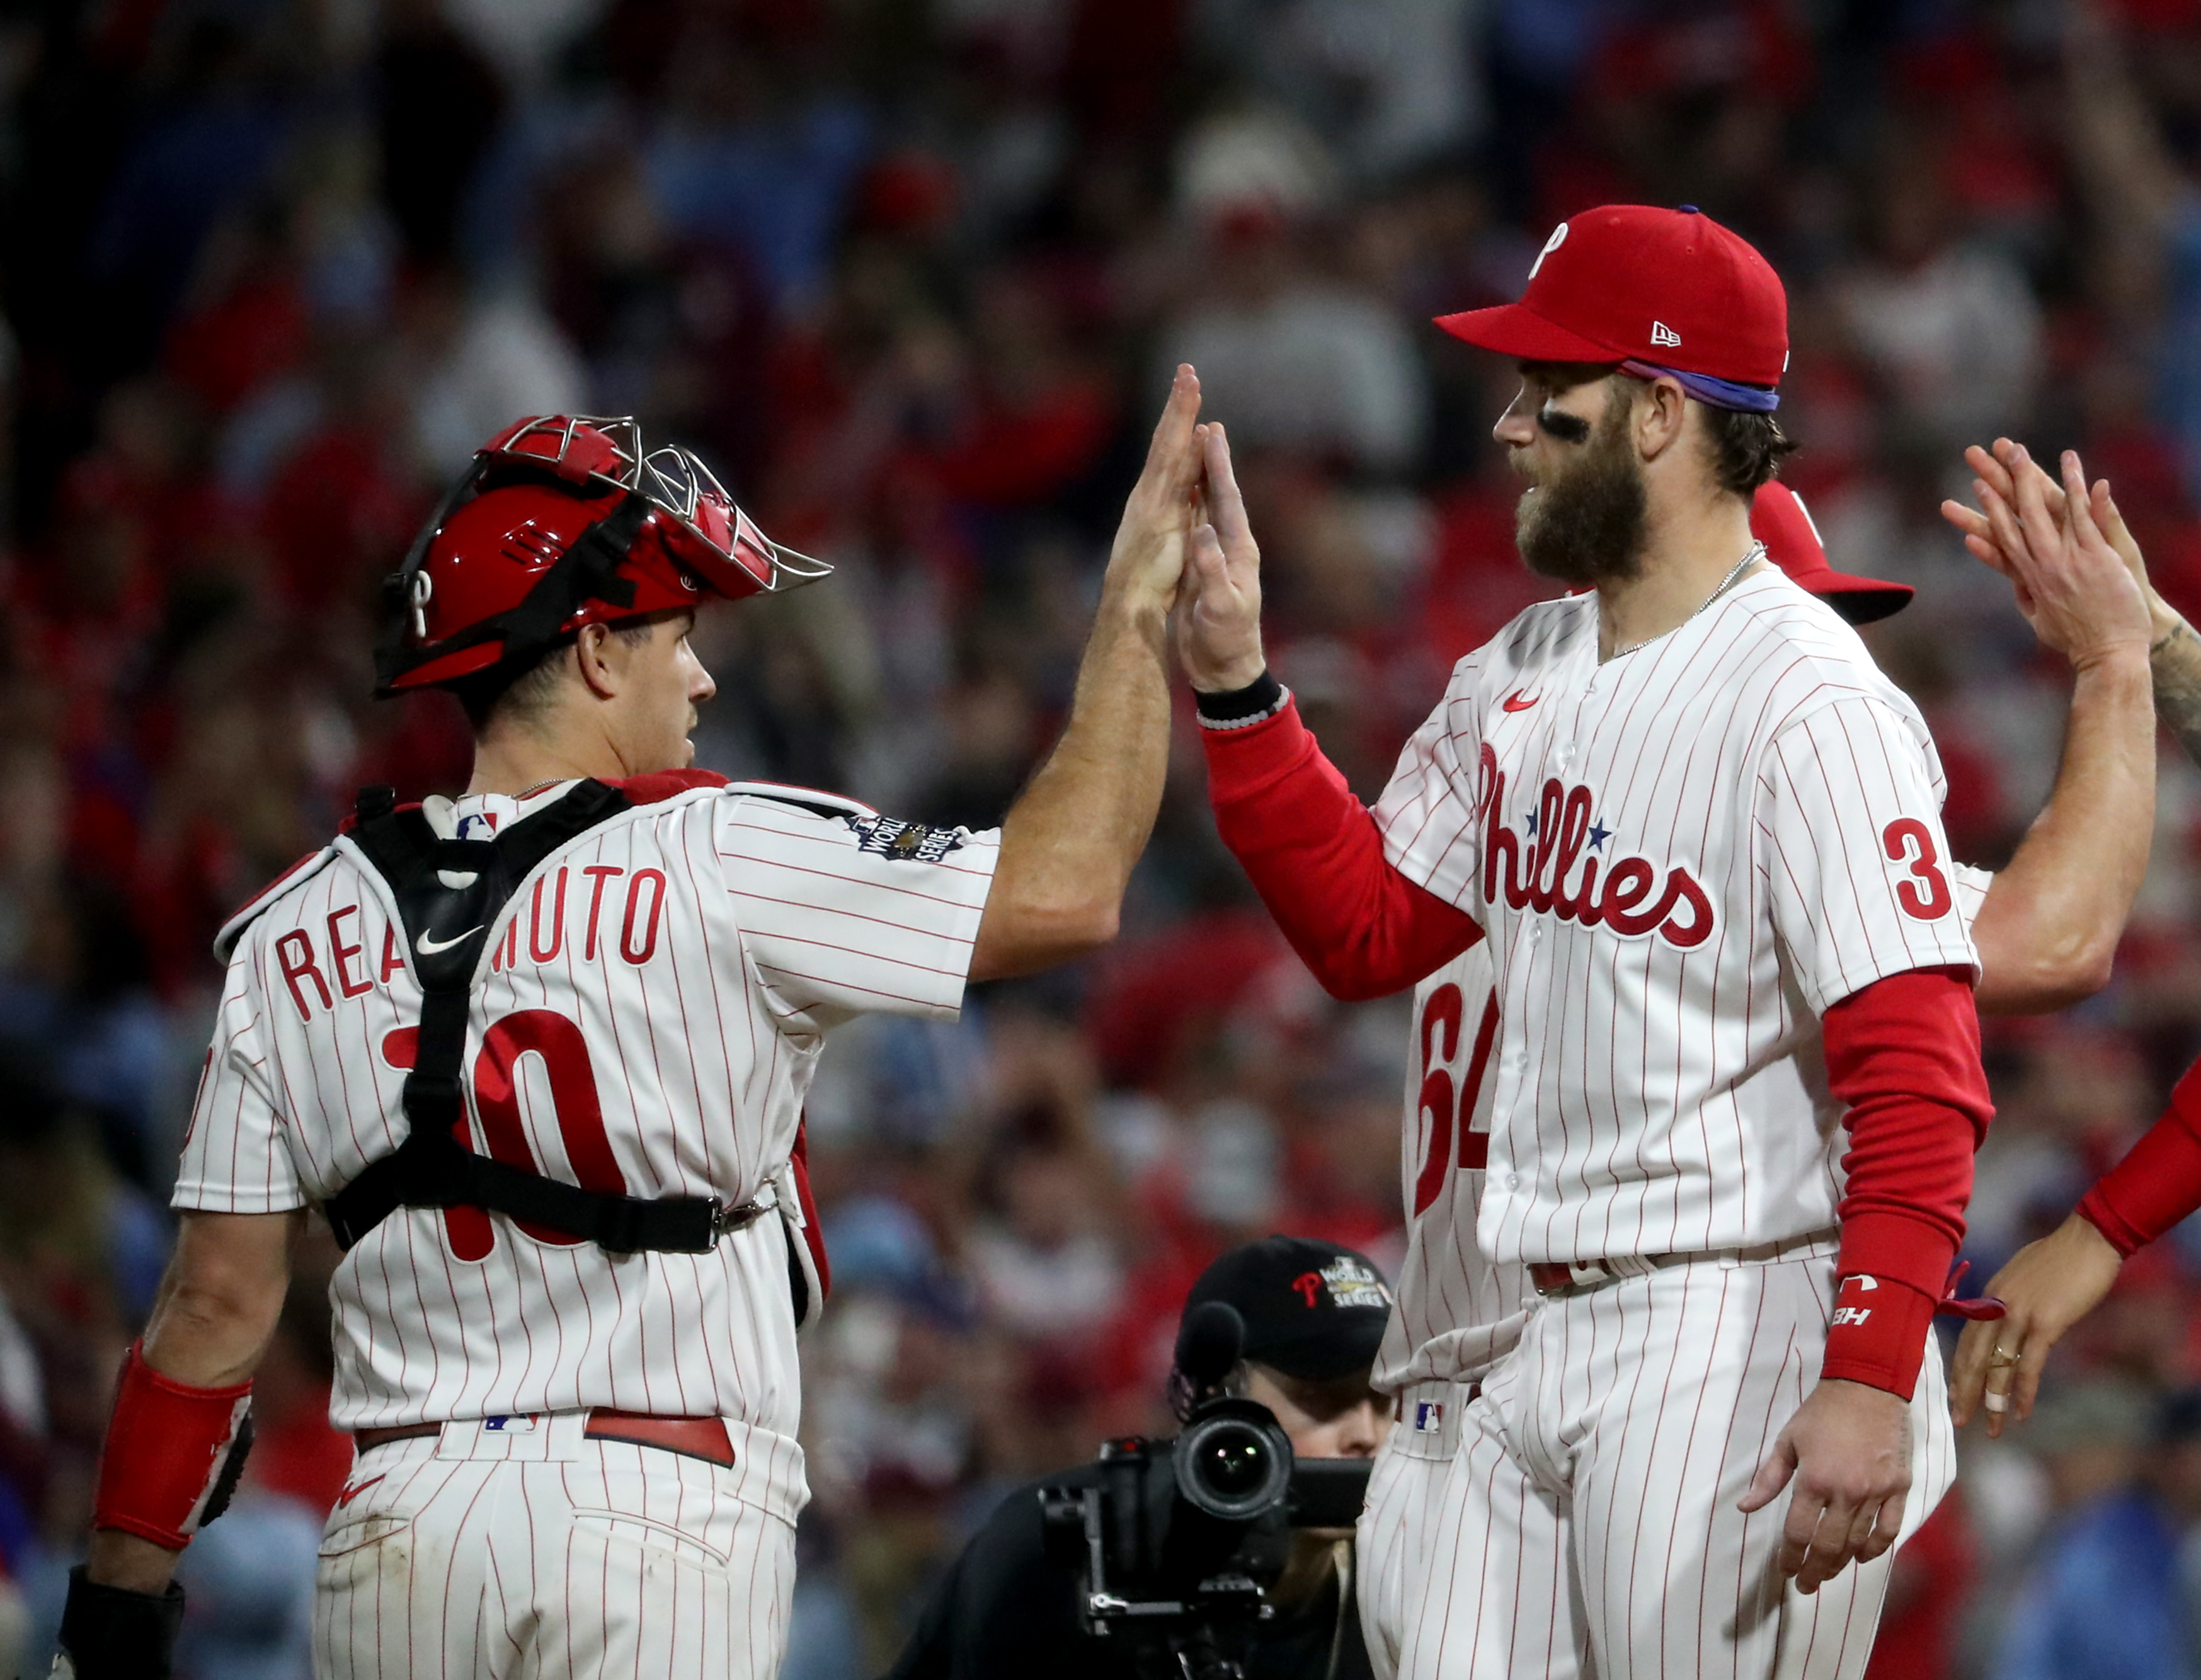 J.T. Realmuto (10) and Bryce Harper (3) of the Philadelphia Phillies celebrate a 7-0 win during World Series Game 3 against the Houston Astros at Citizens Bank Park, Tuesday, Nov. 1, 2022.